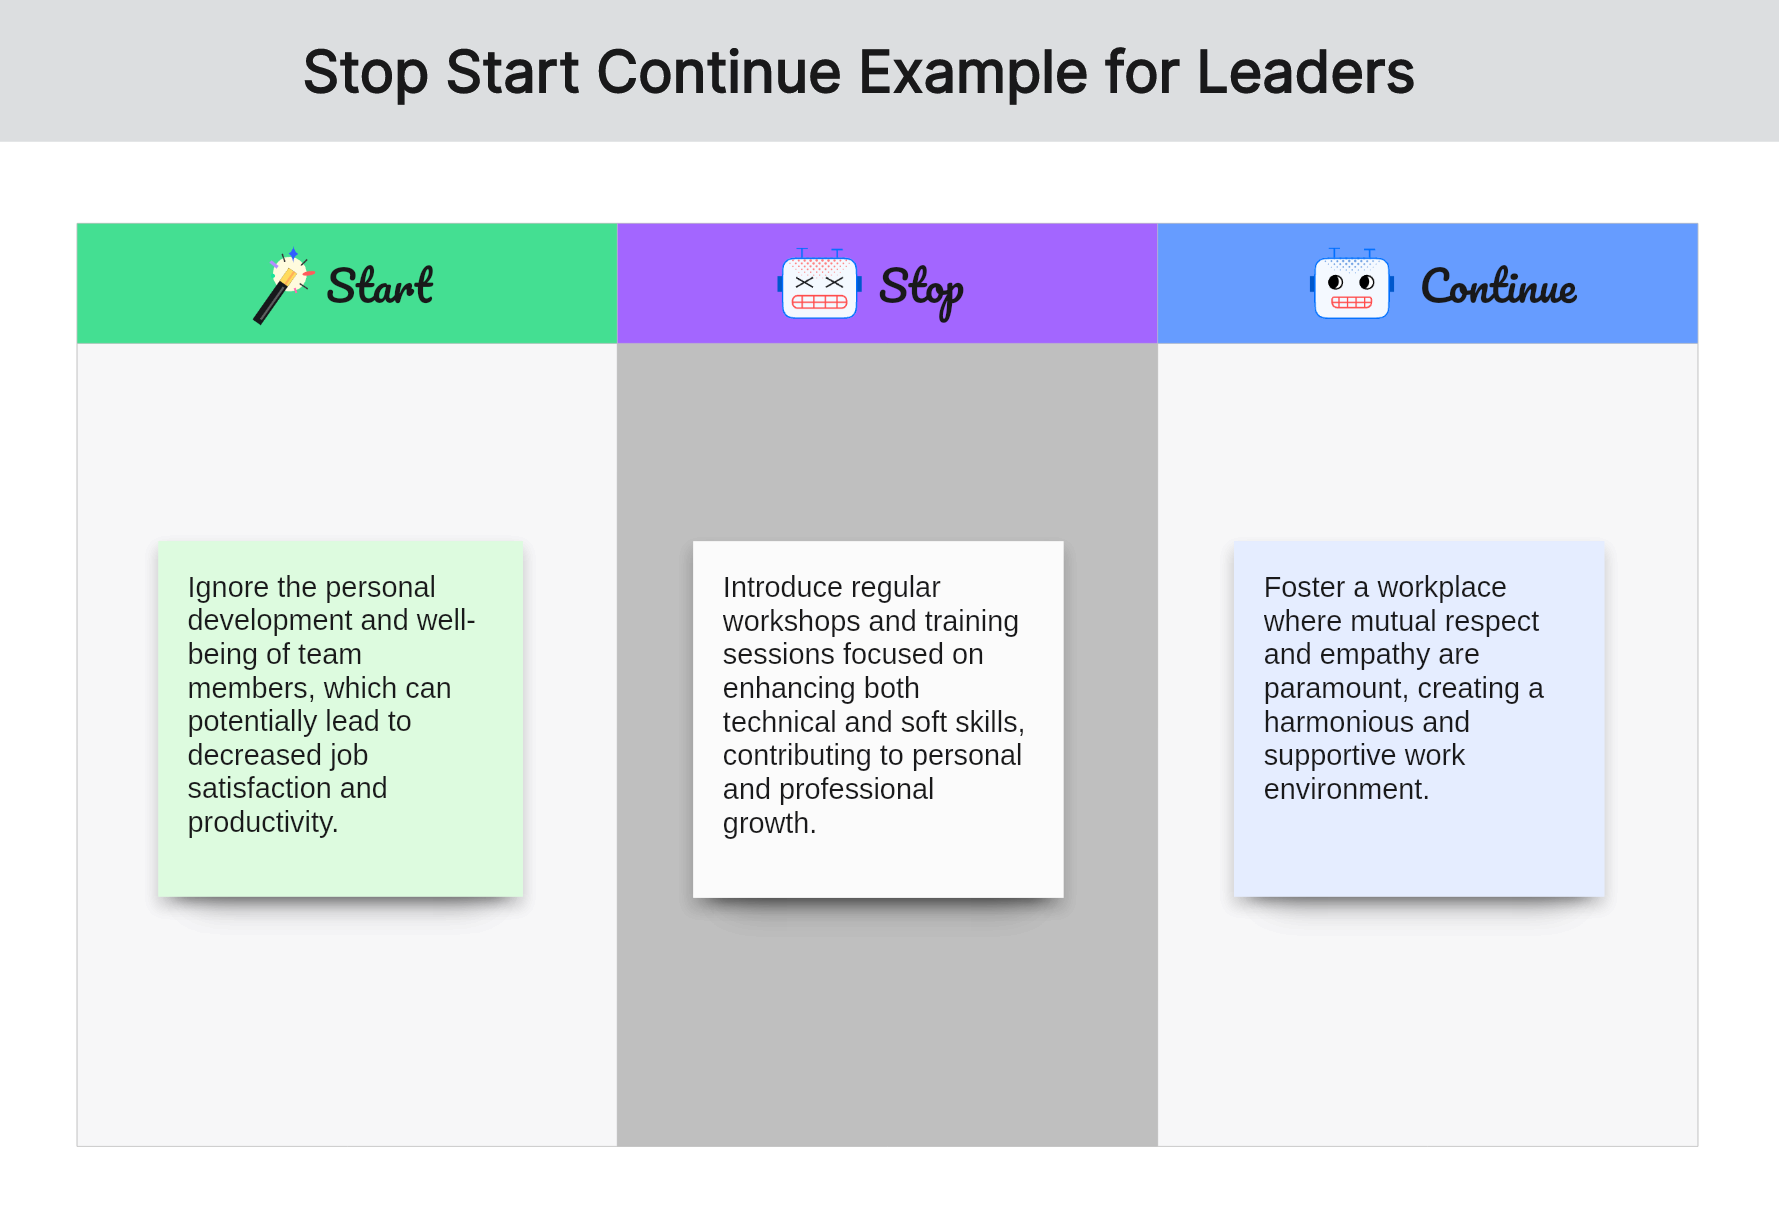 start-stop-continue-examples-for-leaders-02